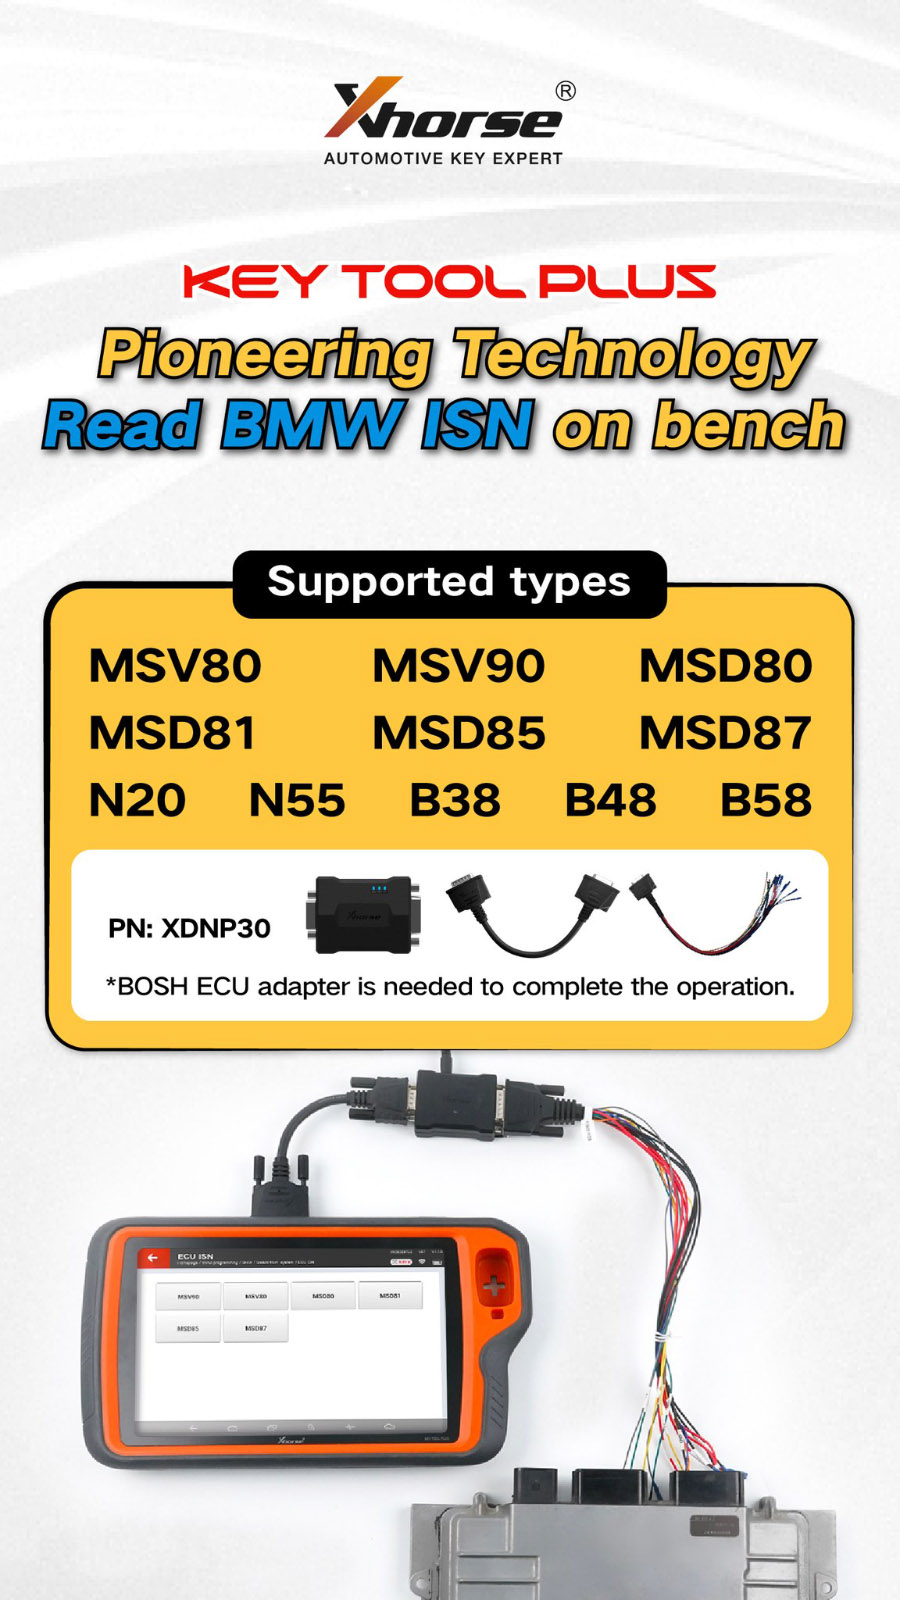 new supported dme on bench